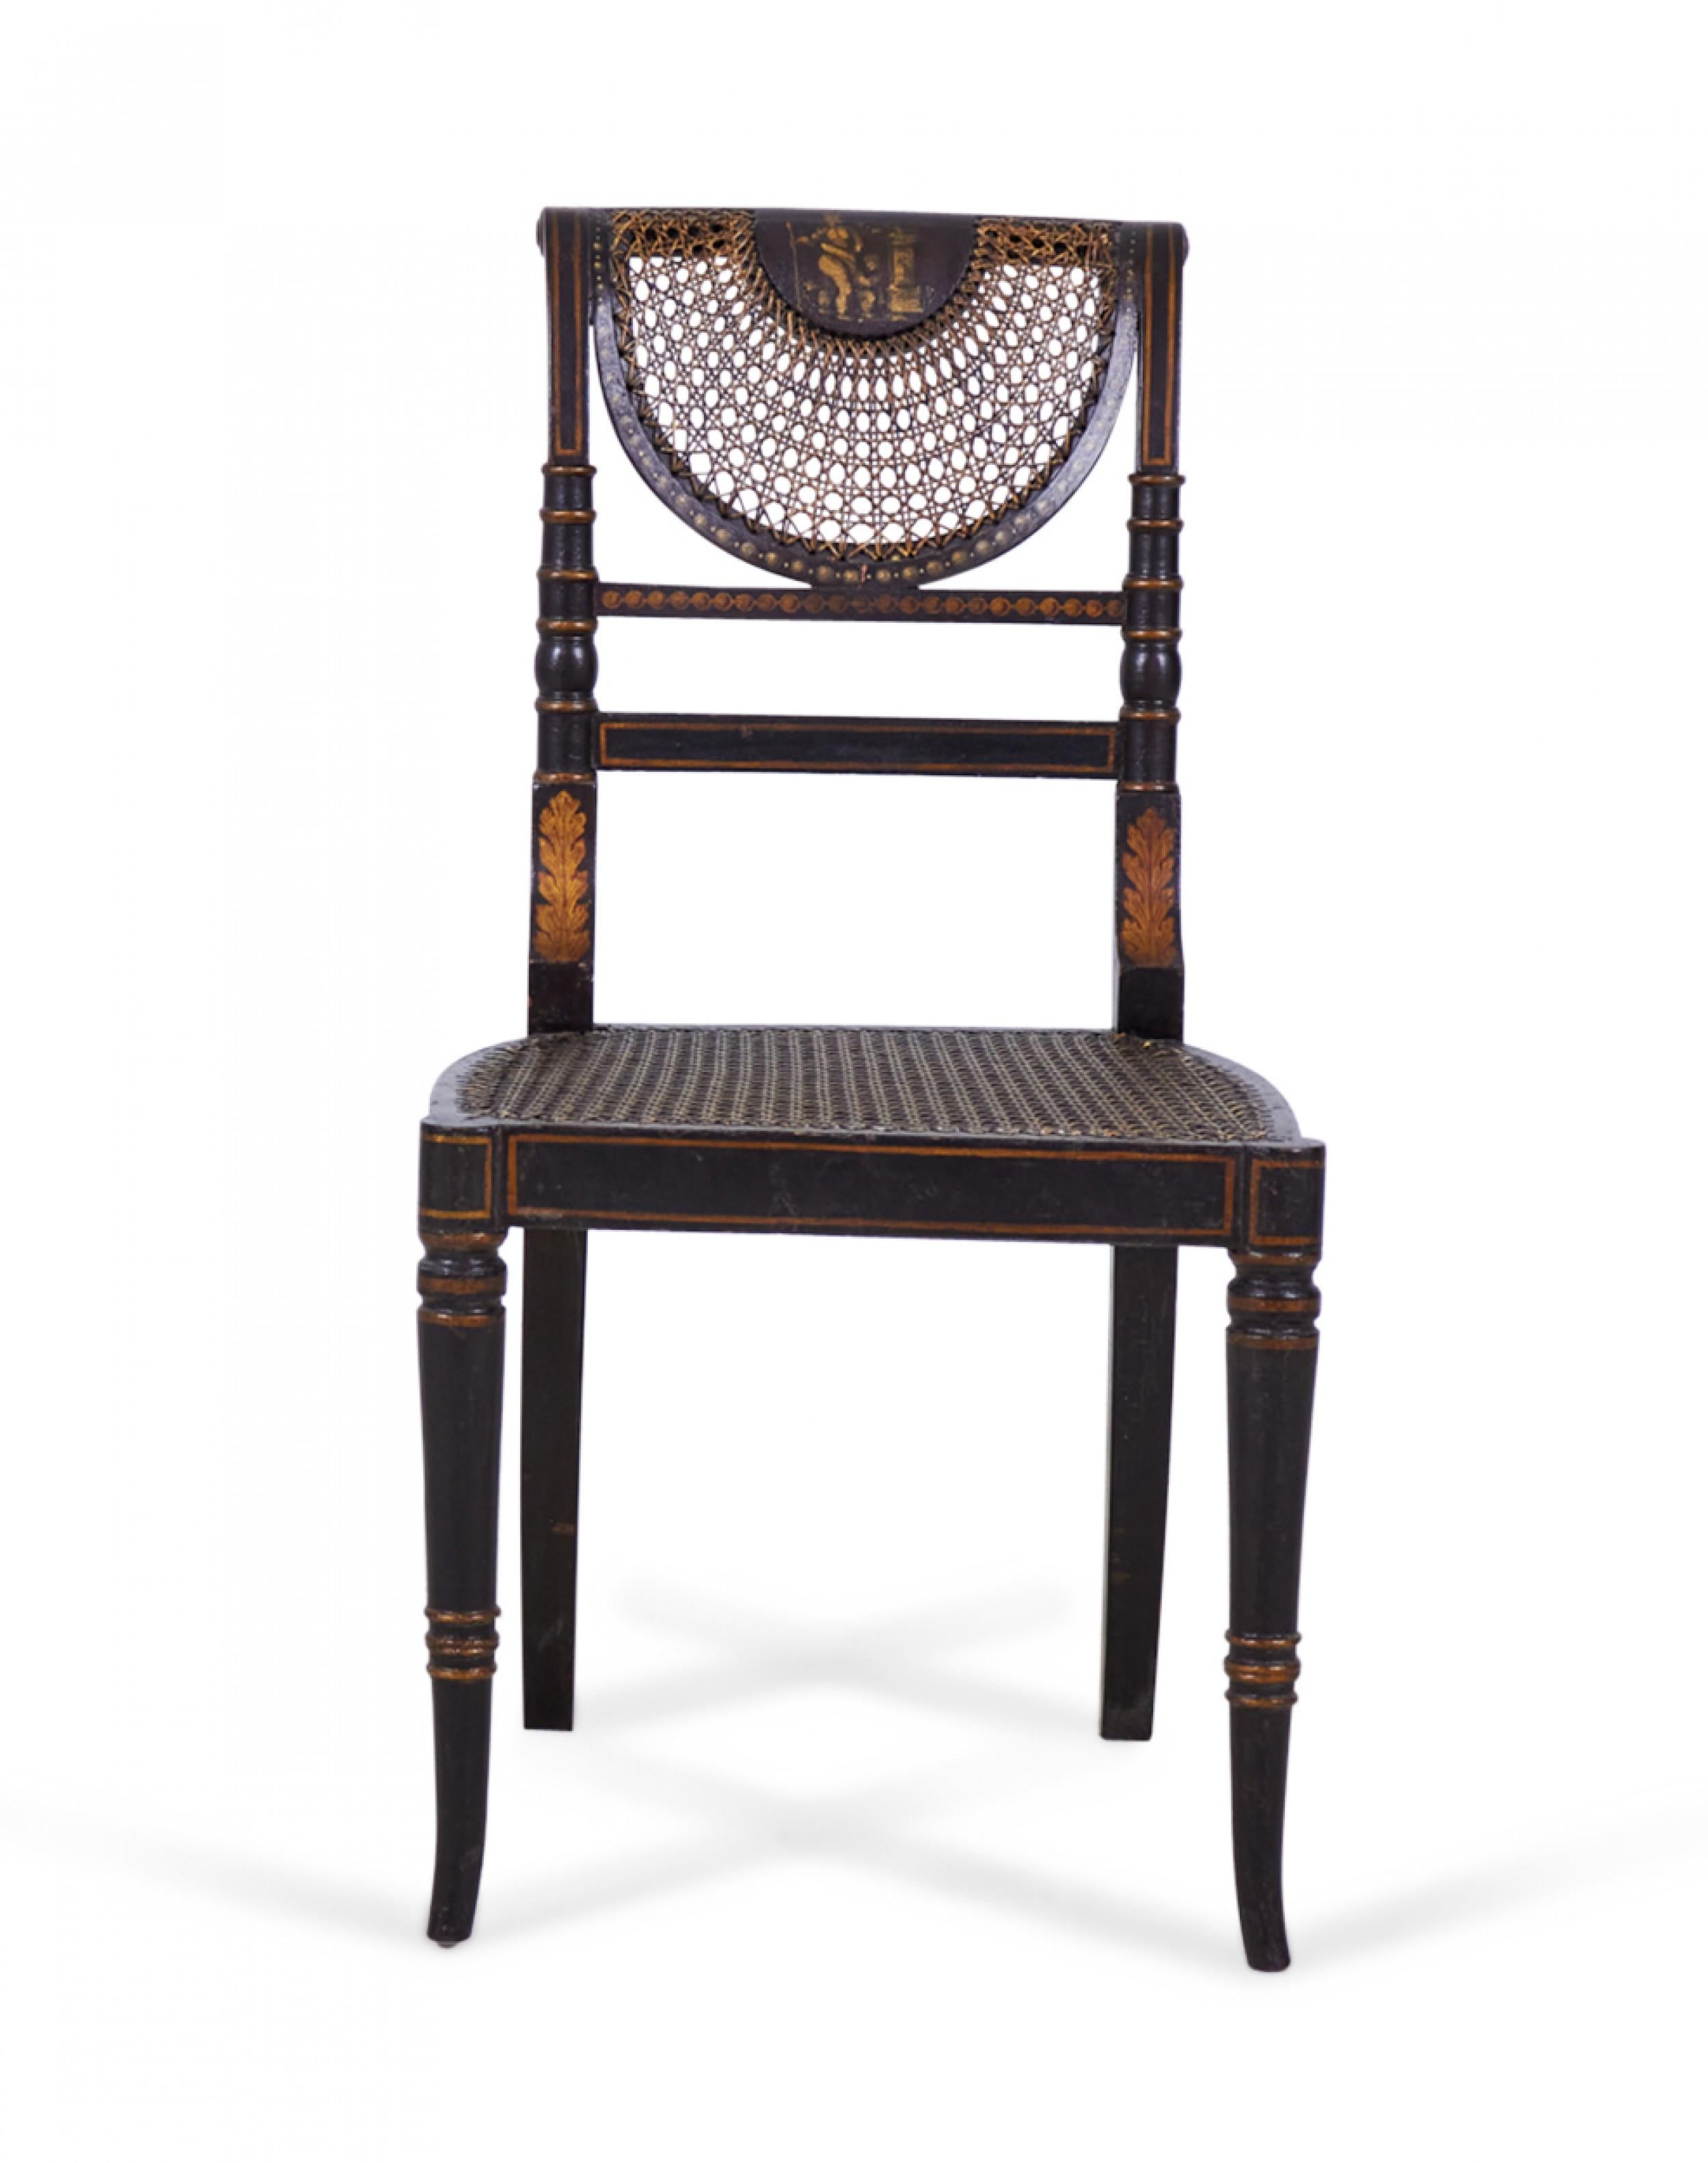 Set of 4 English Regency (19th century) side chairs with turned painted black and gold frames with caned seats and fan-shaped back panels.